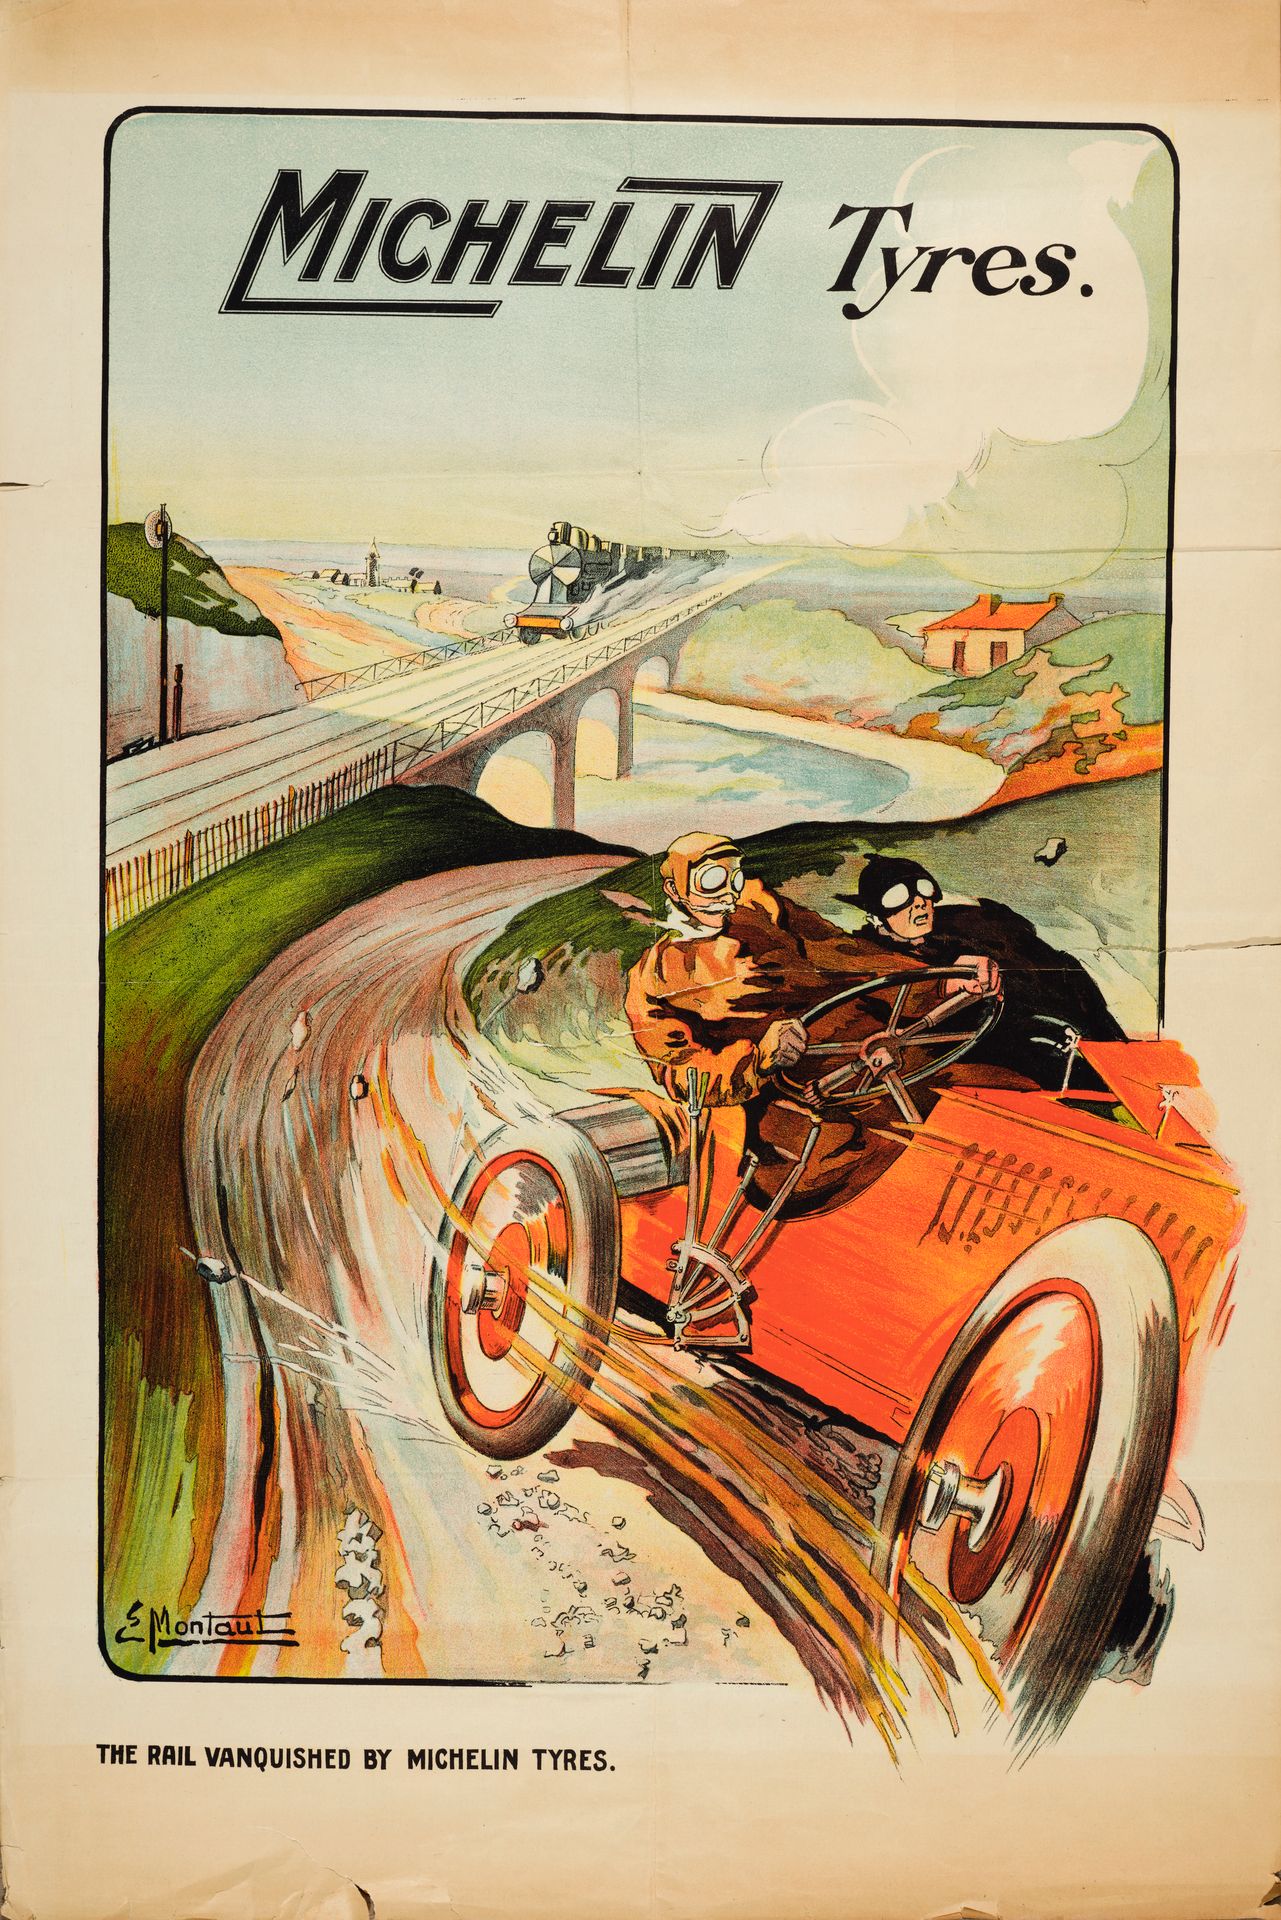 Null Ernest MONTAUT (1879-1909)
Michelin Tyres
Rare unfolded poster in English
T&hellip;